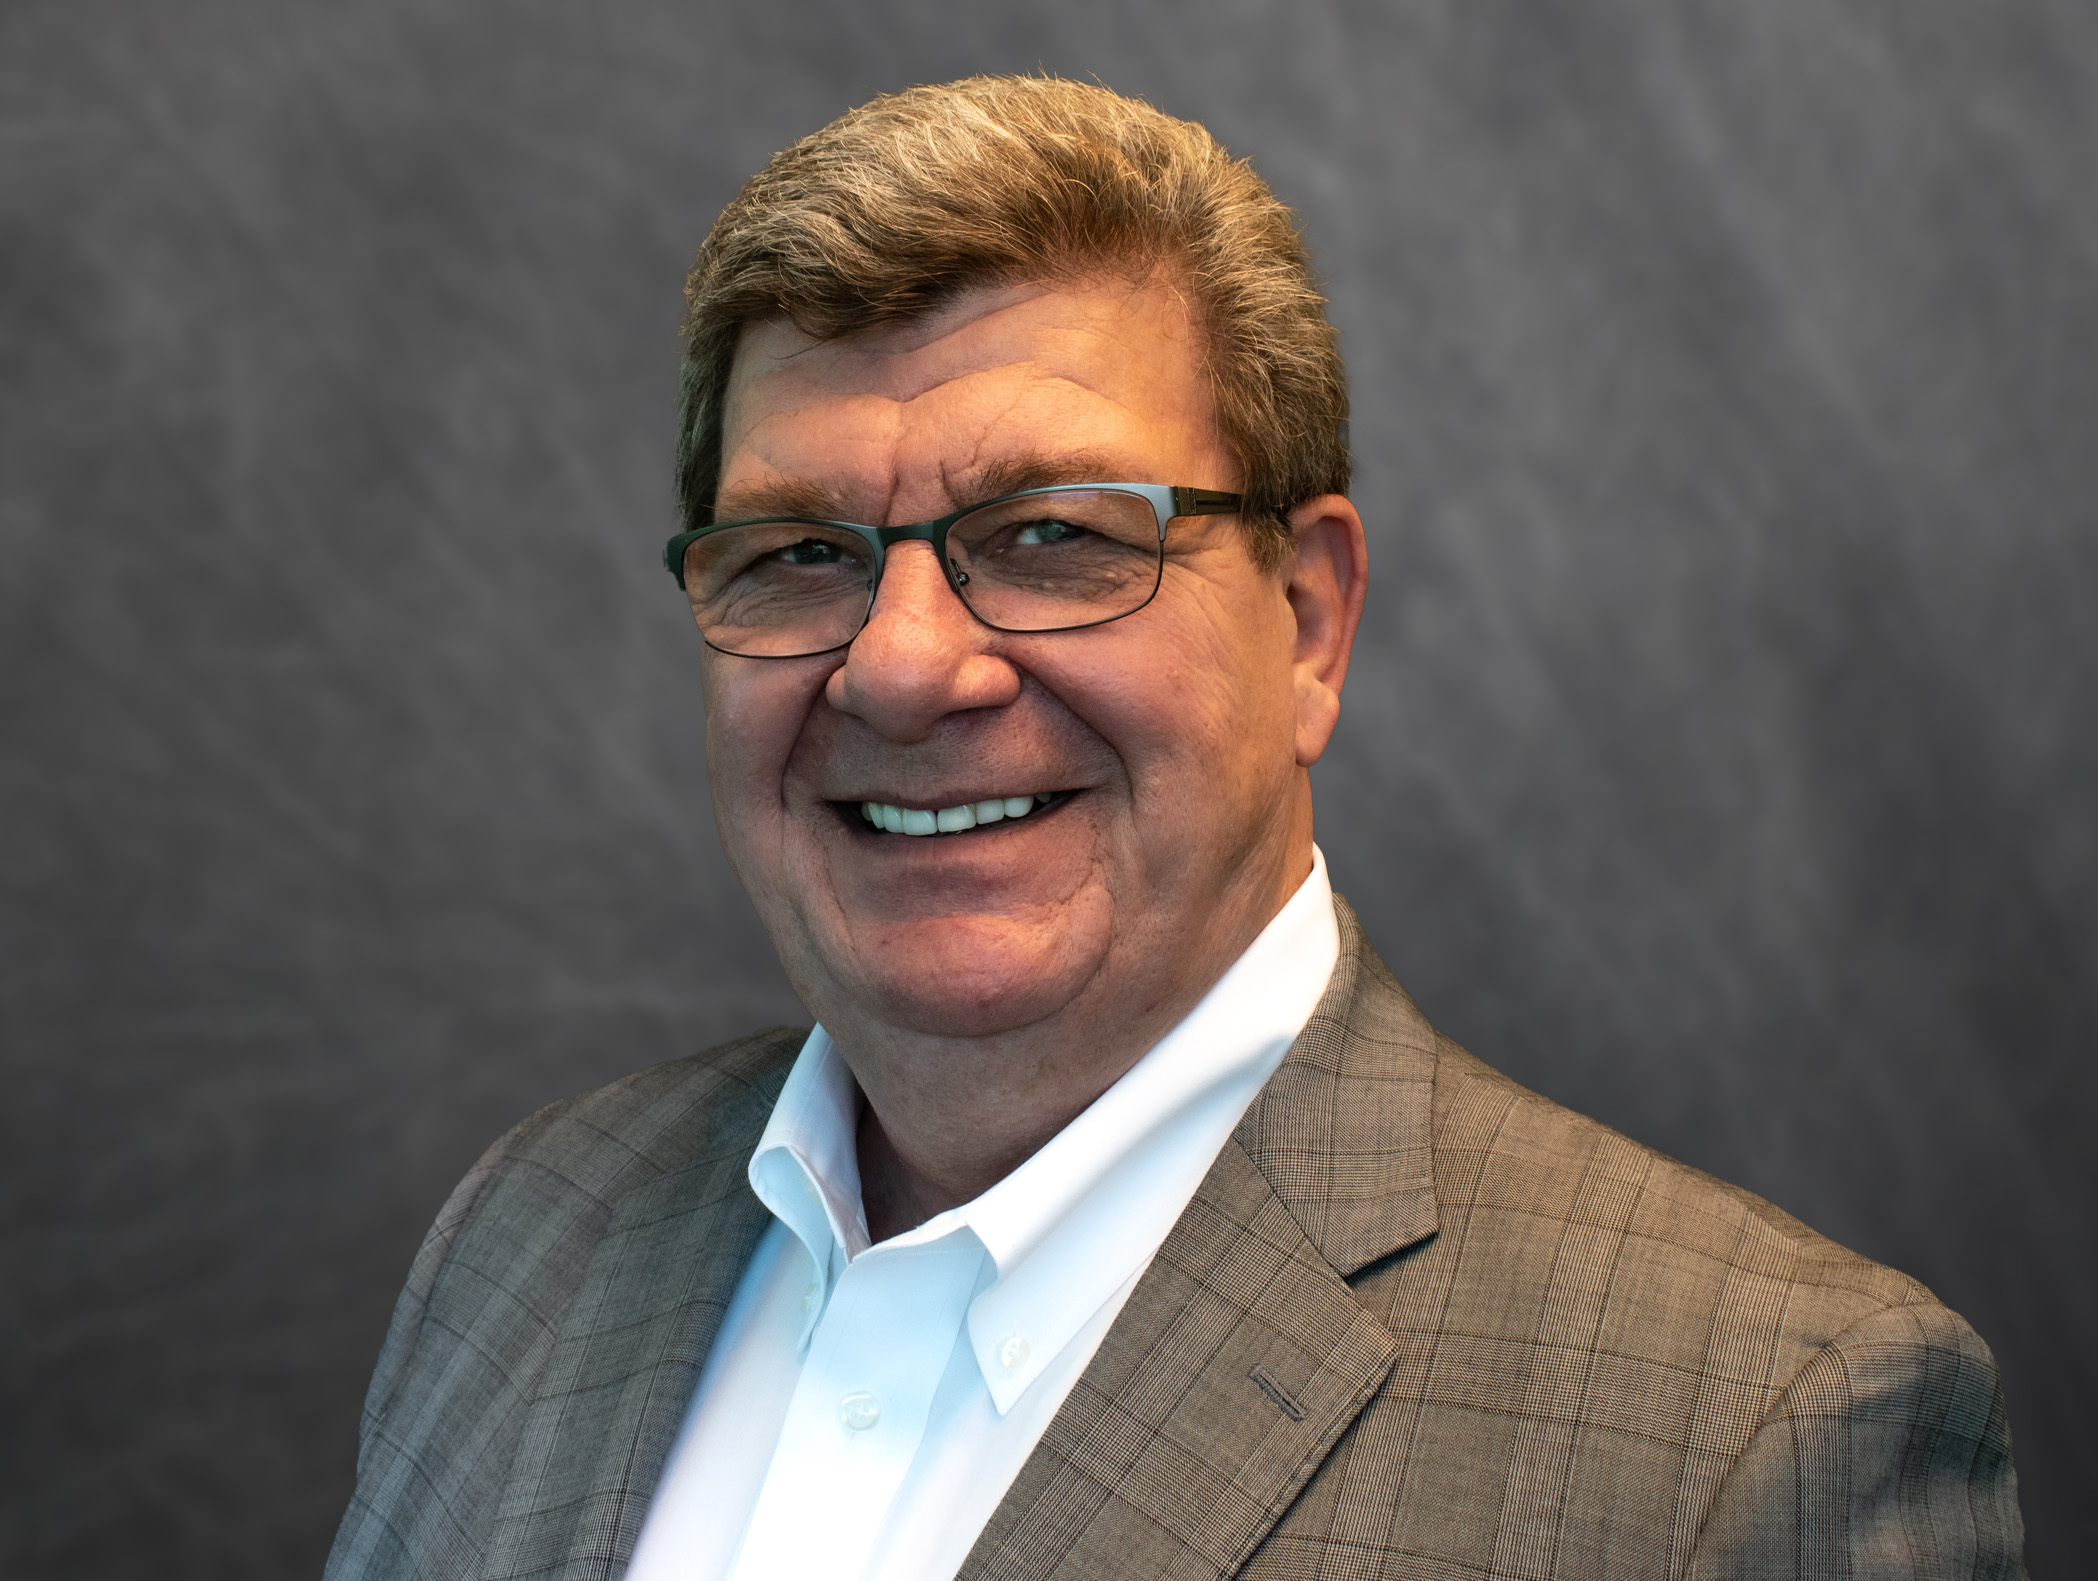 TRIOSE Promotes Carl Marks to VP of Business Systems and Technology